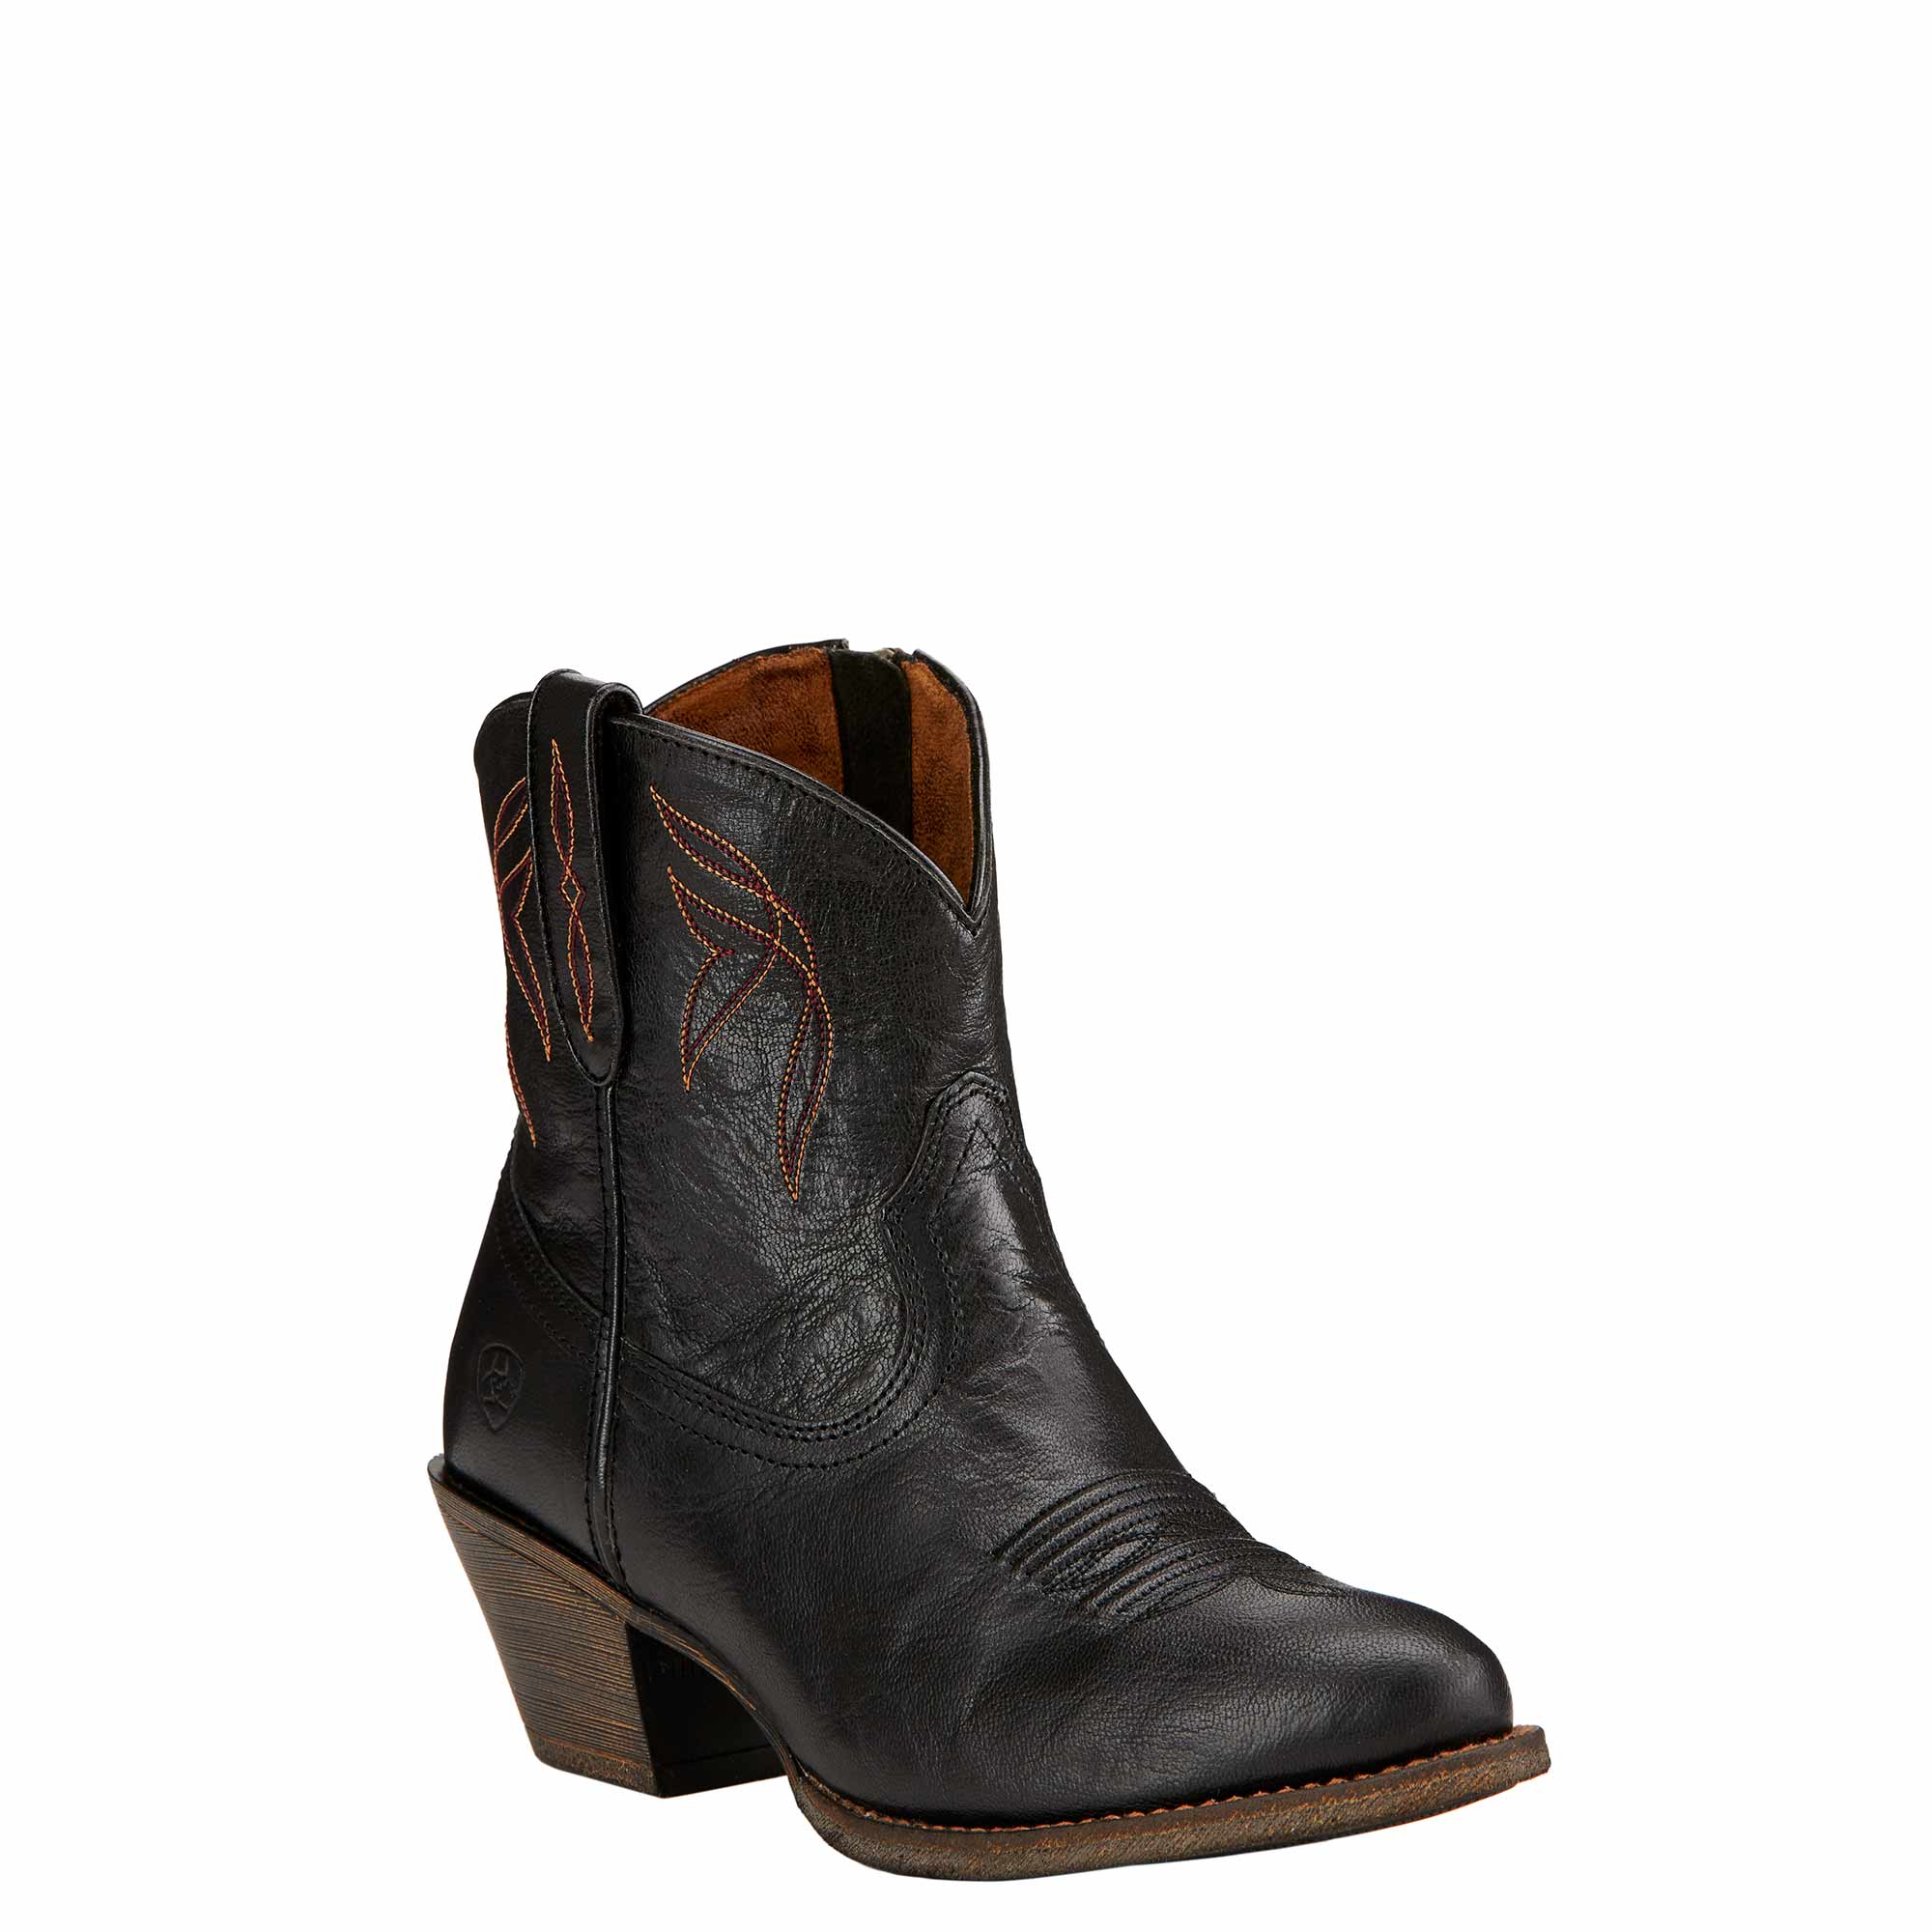 Ariat Western Boots Women’s Old Black Shorty with Western Inspired ...